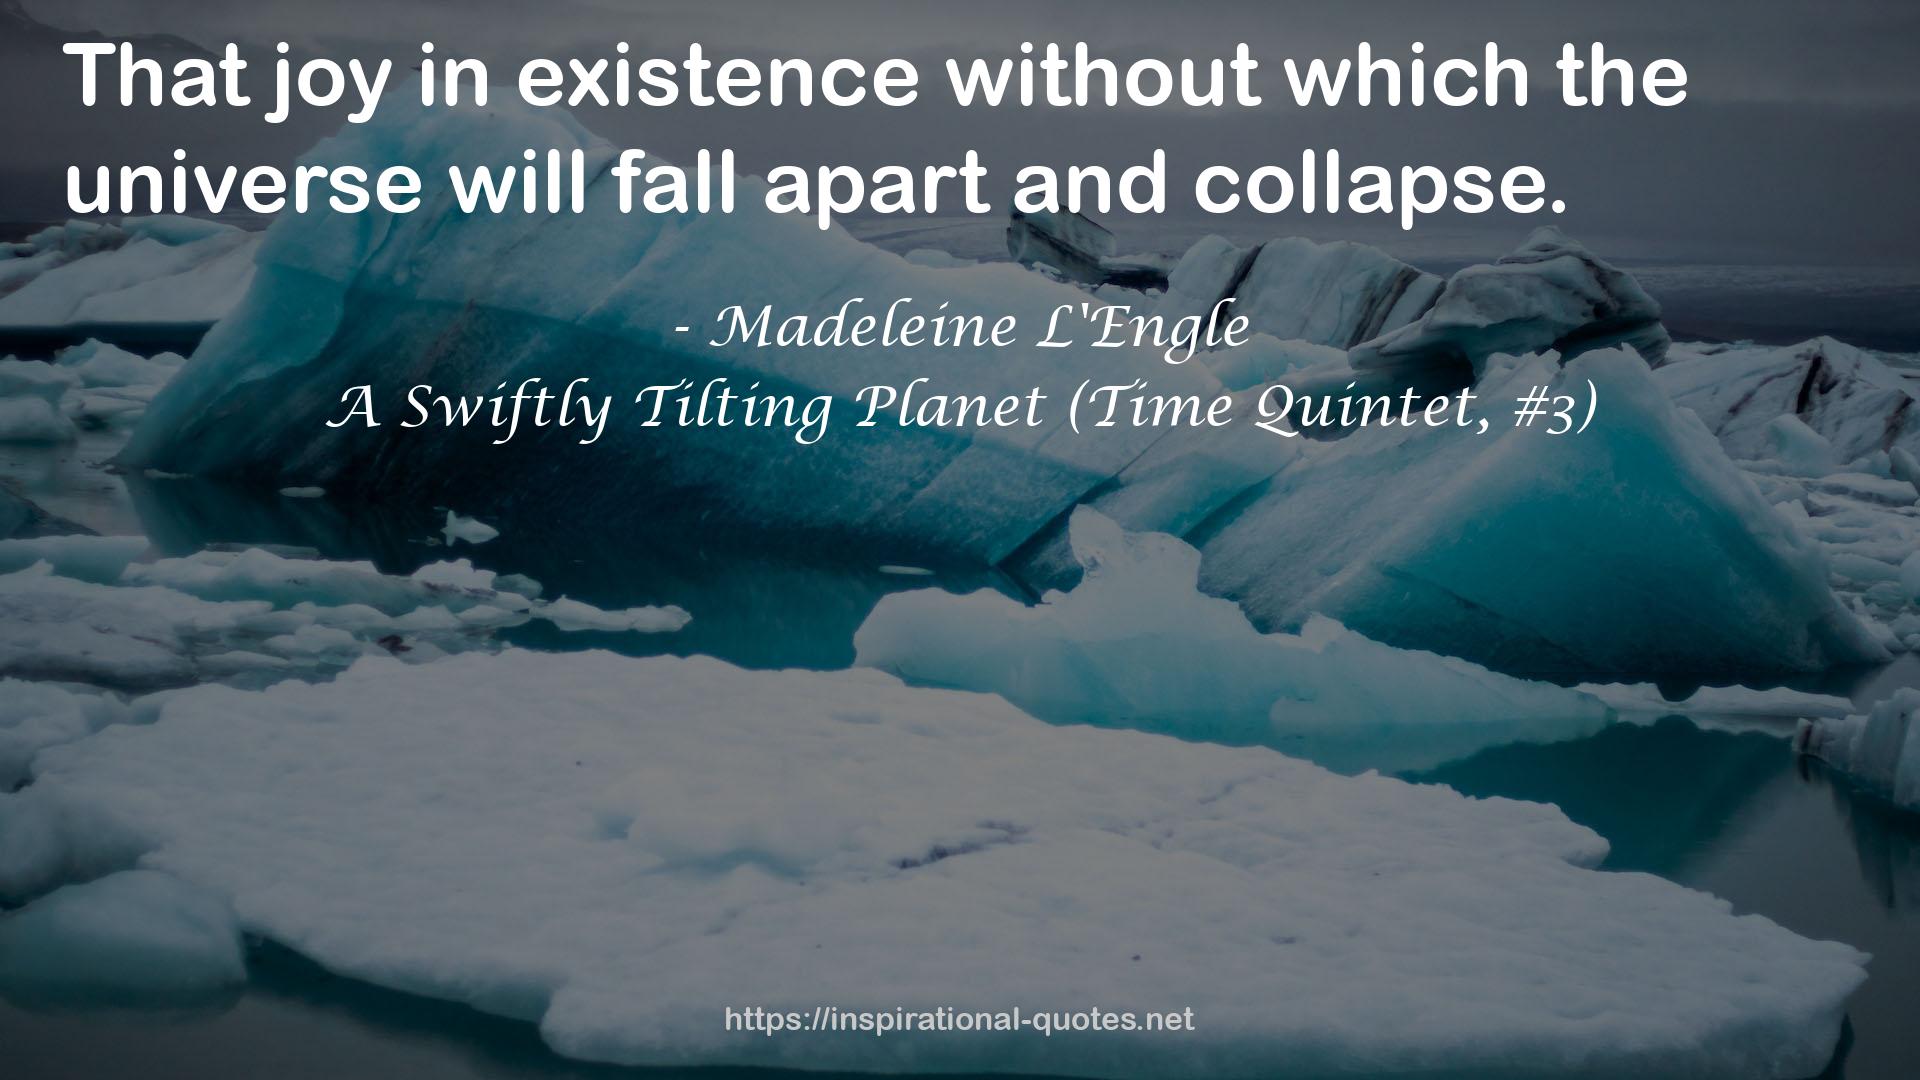 A Swiftly Tilting Planet (Time Quintet, #3) QUOTES